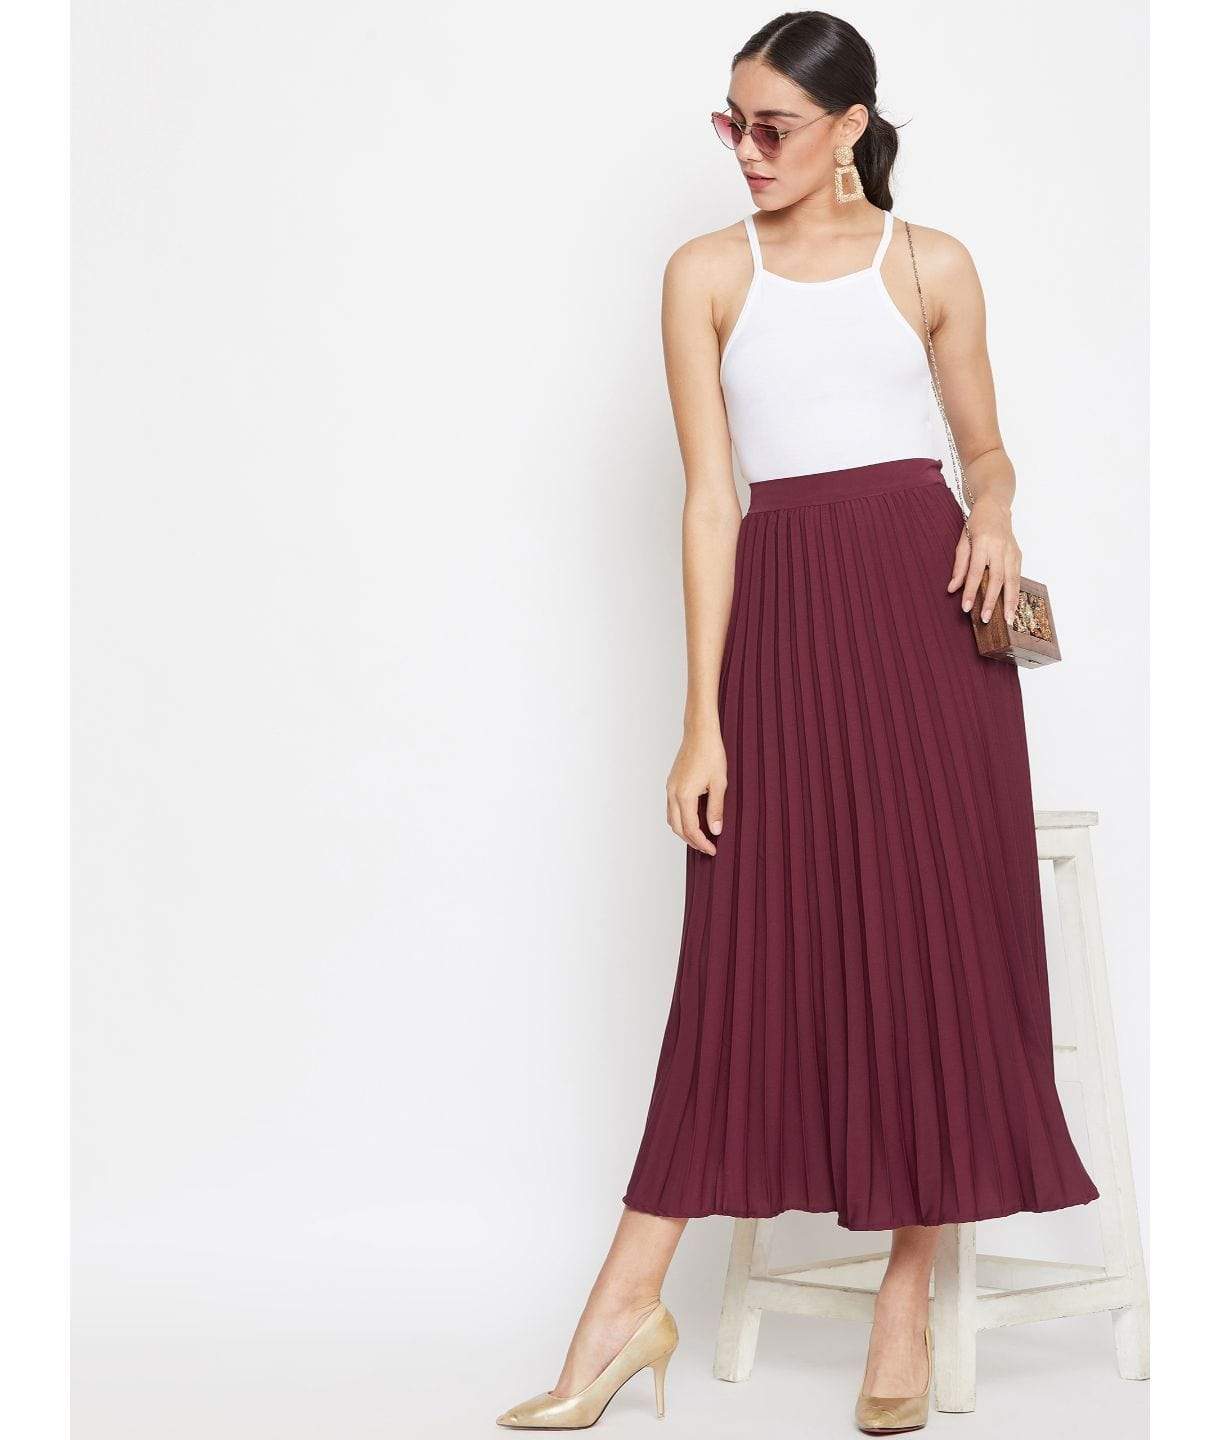 a formal knee-length pleated skirt.-10 Stylish Designs of Formal Skirts to Wear for Office-By live love laugh